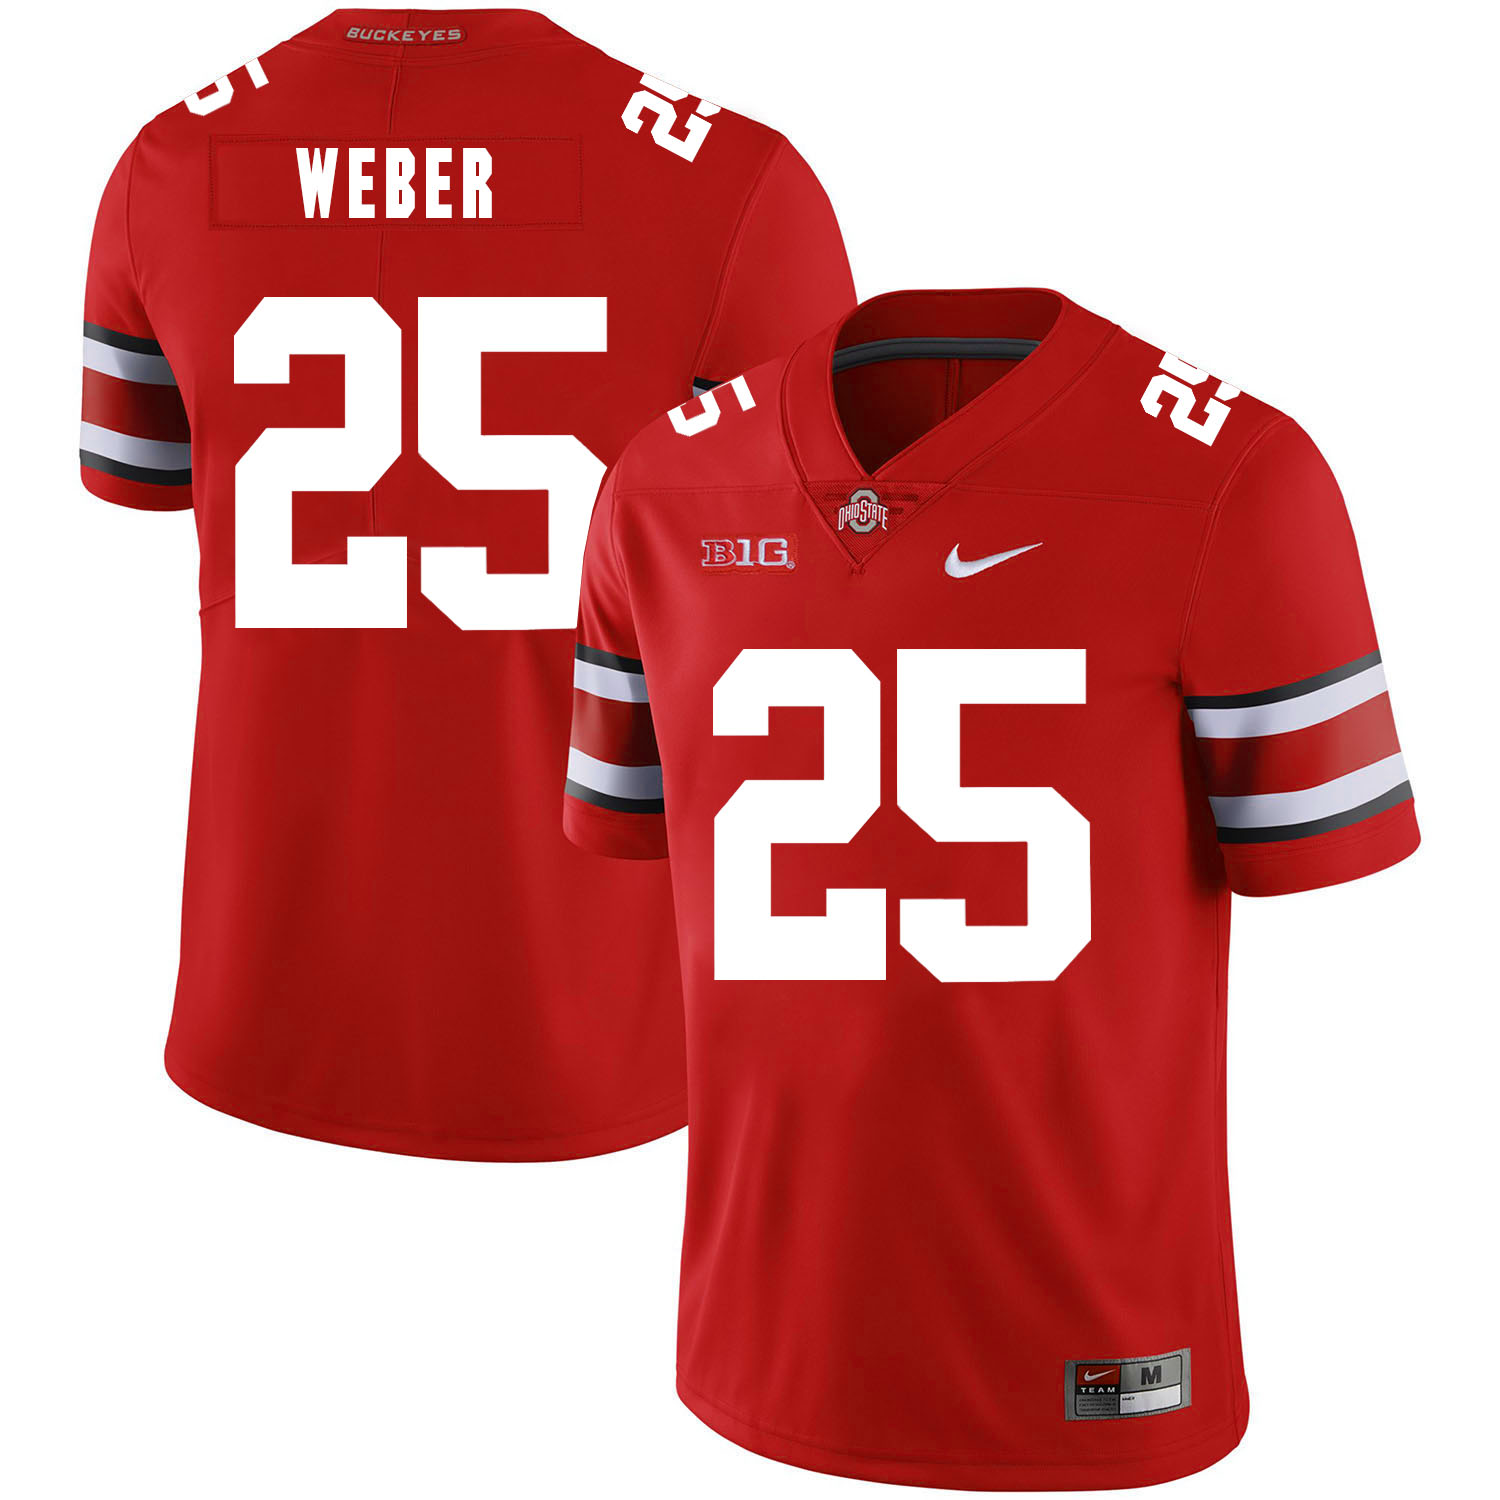 Ohio State Buckeyes 25 Mike Weber Red Nike College Football Jersey